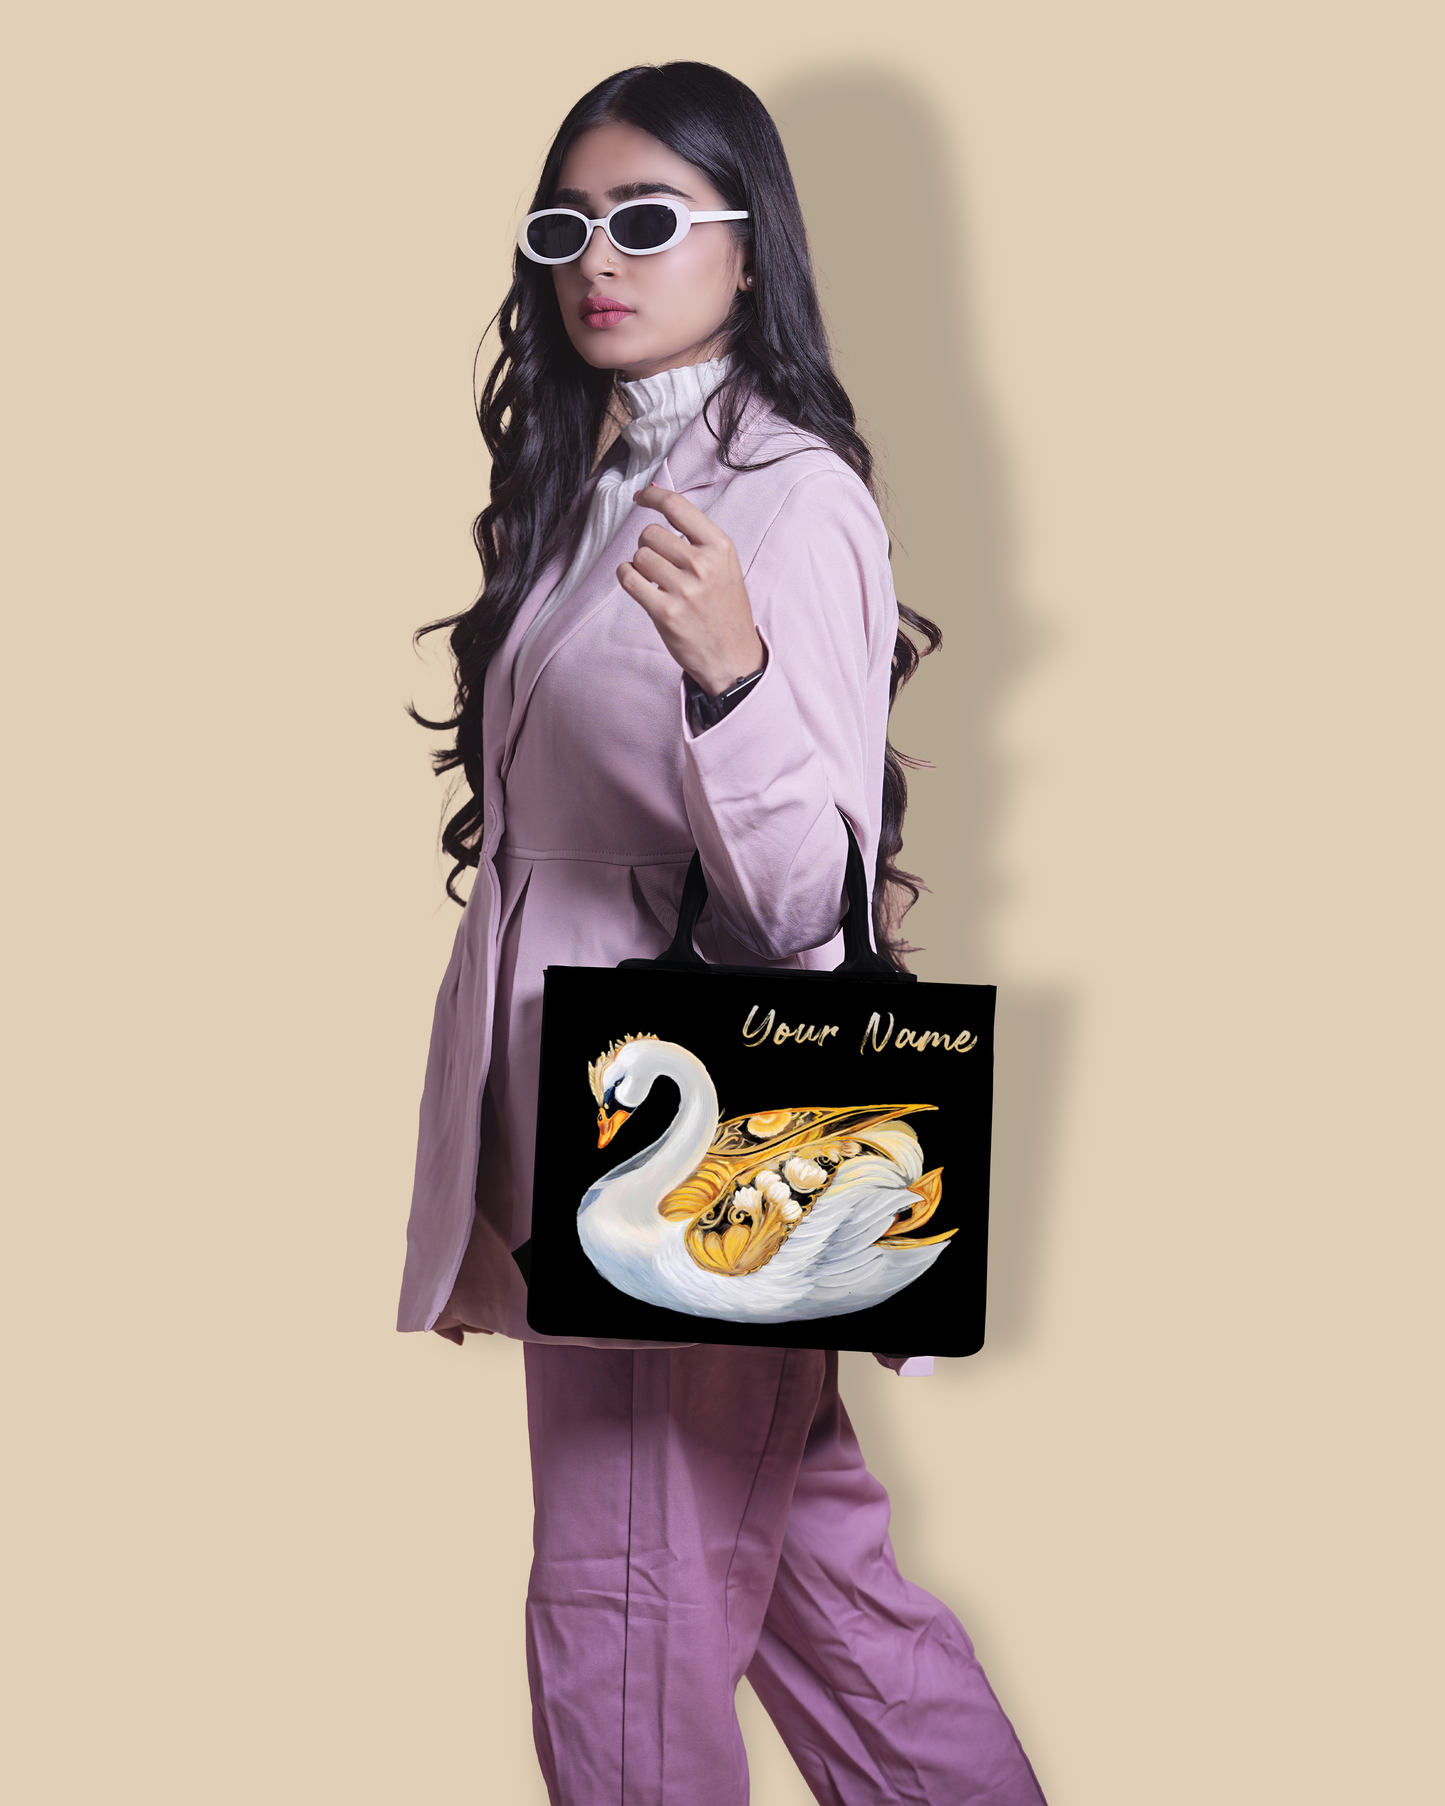 Customized small Tote Bag Designed With Swans Birds pattern